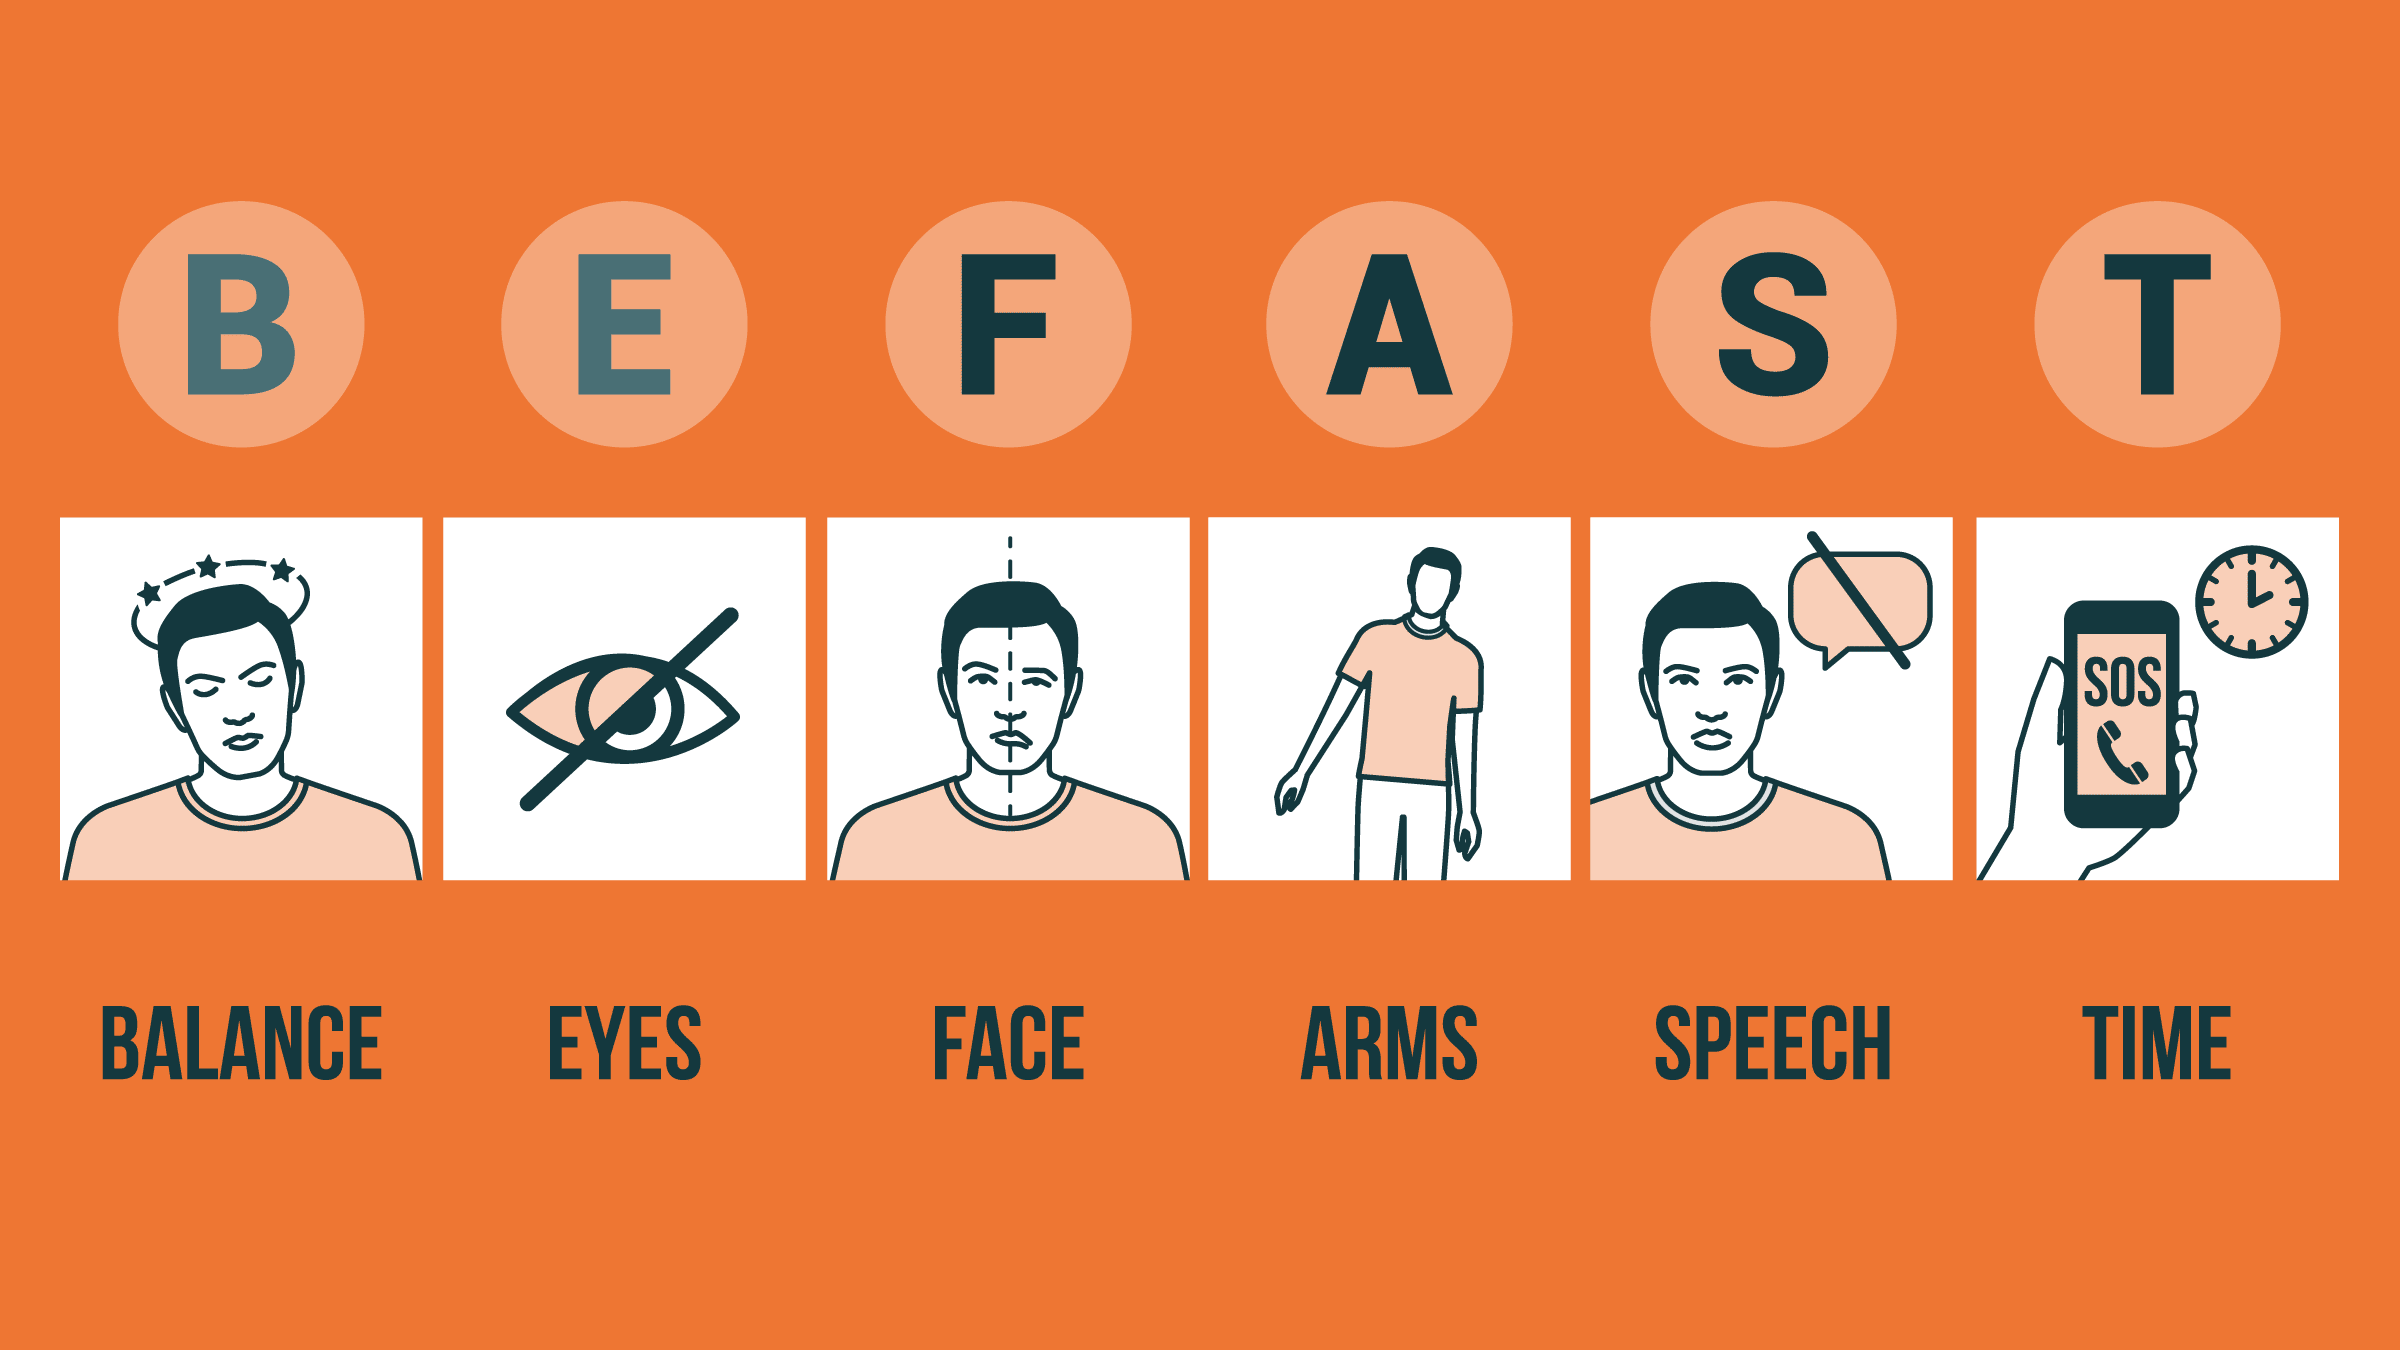 BE FAST stands for Balance, Eyes, Face, Arms, Speech and Time